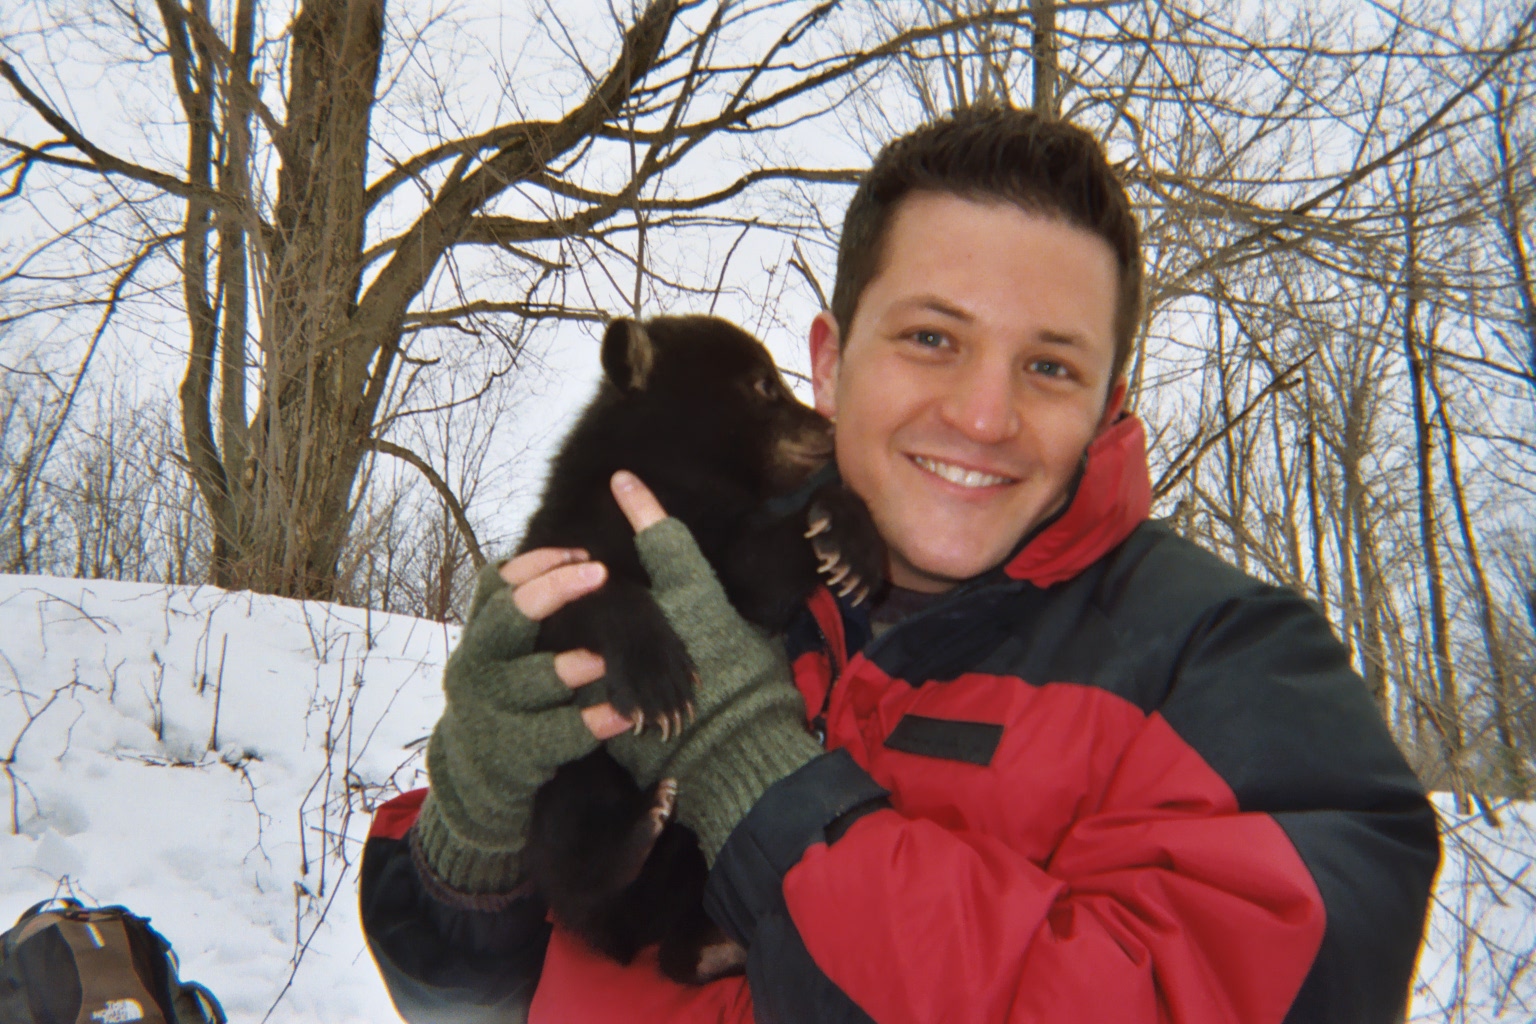 David Mizejewski working with biologists in upstate New York to tag a mother bear and check on health of her newborn cubs. From Animal Planet's Springwatch USA 2007 mini-series.